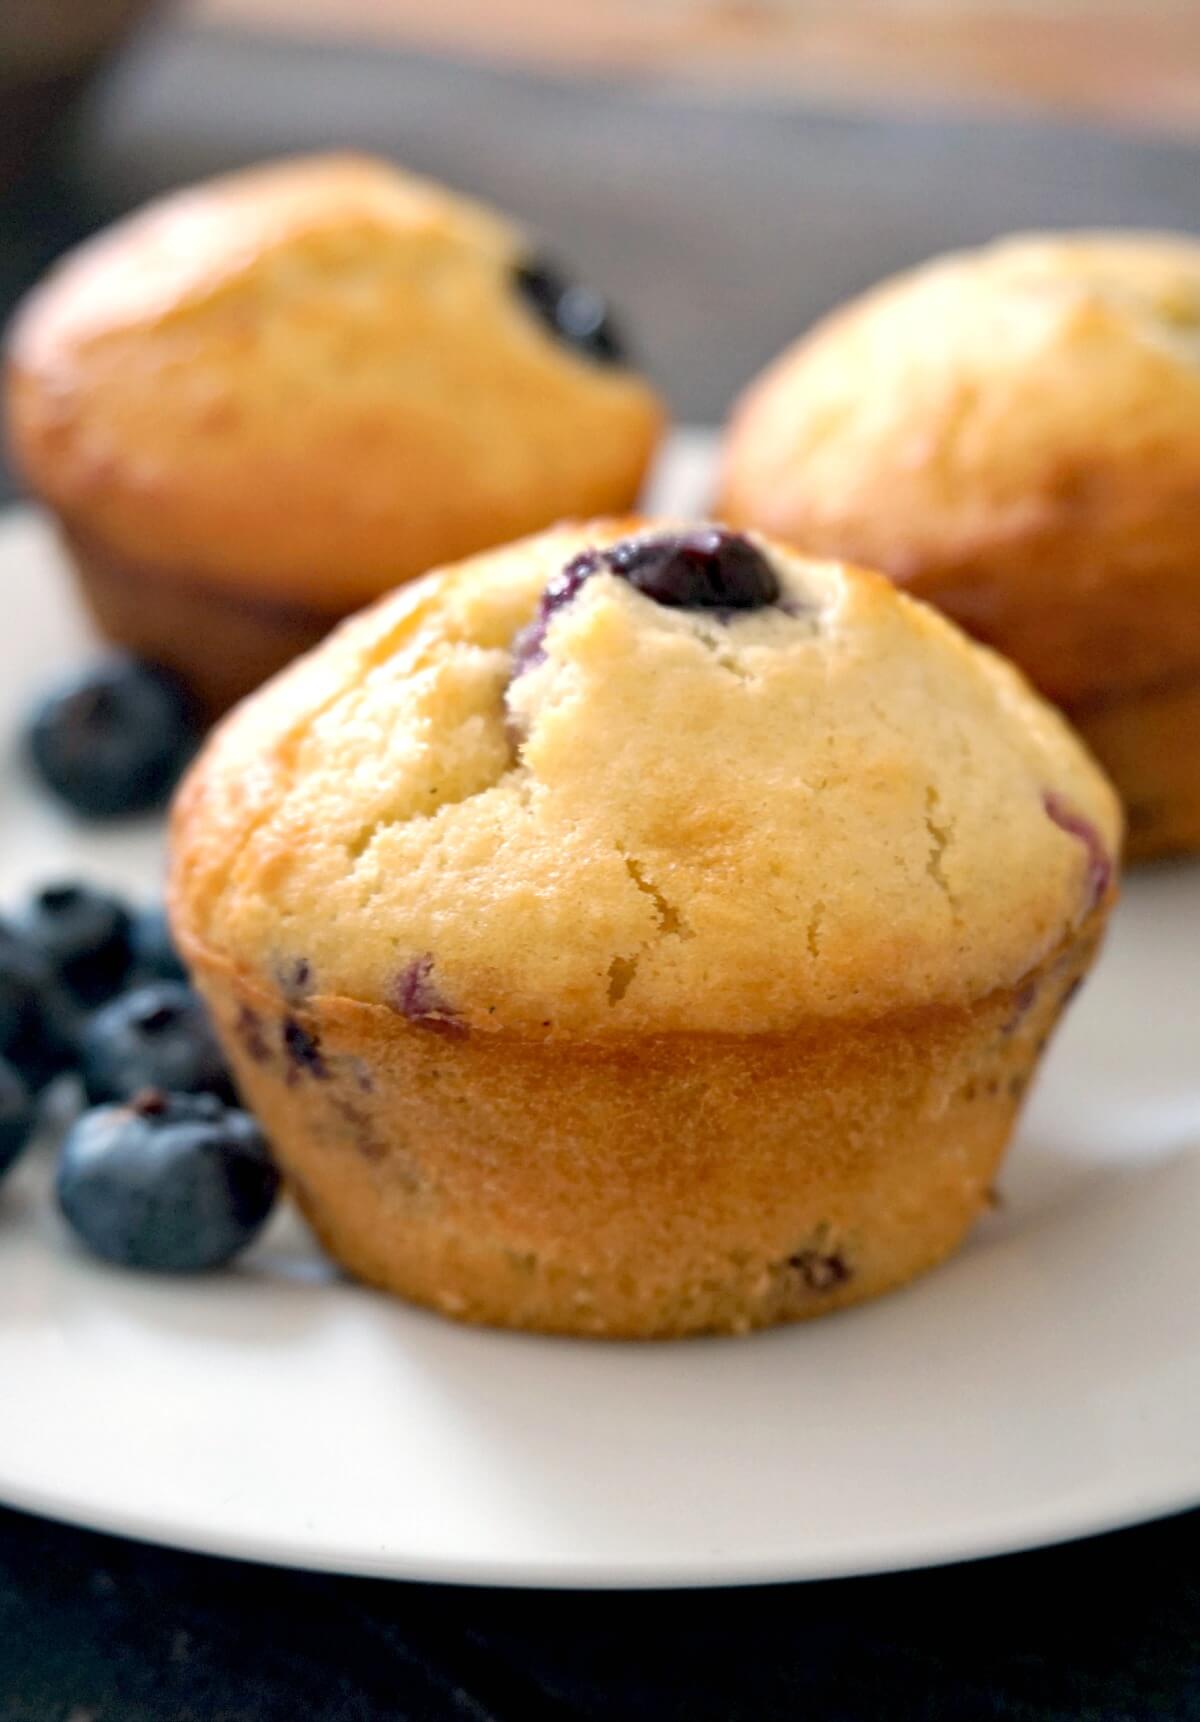 A muffin with 2 others in the background and blueberries around